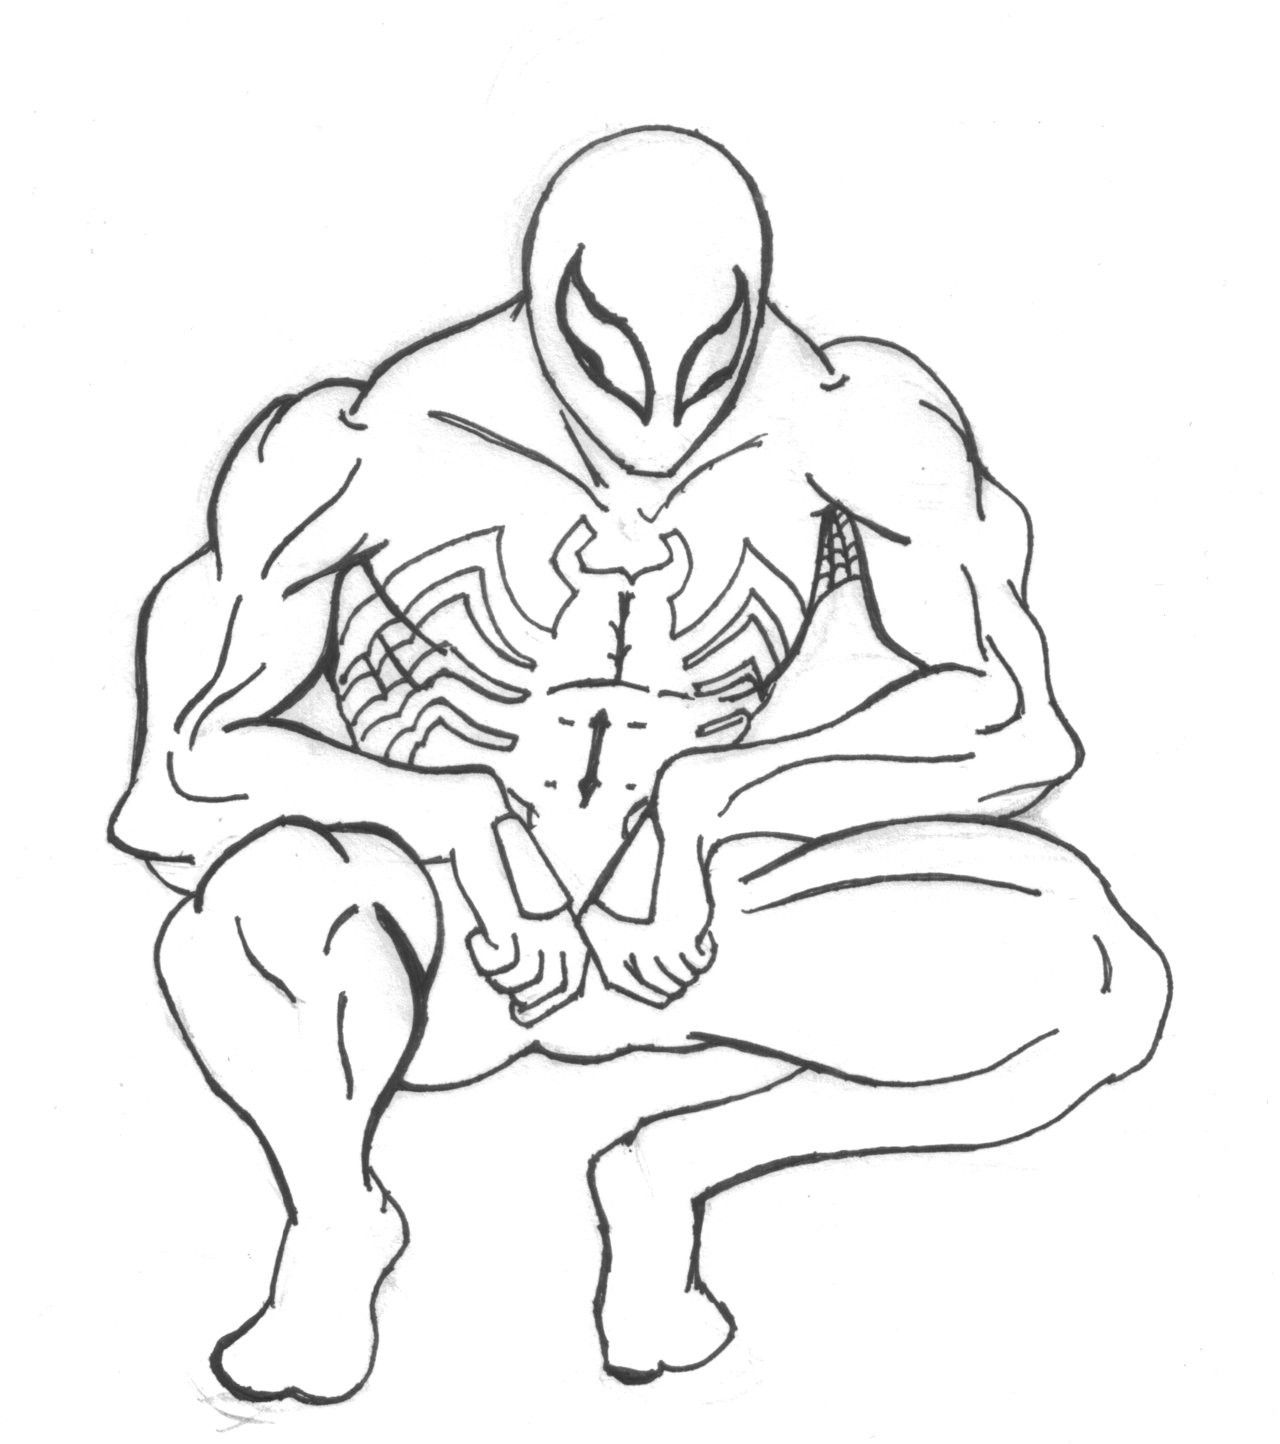 Black Spiderman Coloring Pictures - High Quality Coloring Pages